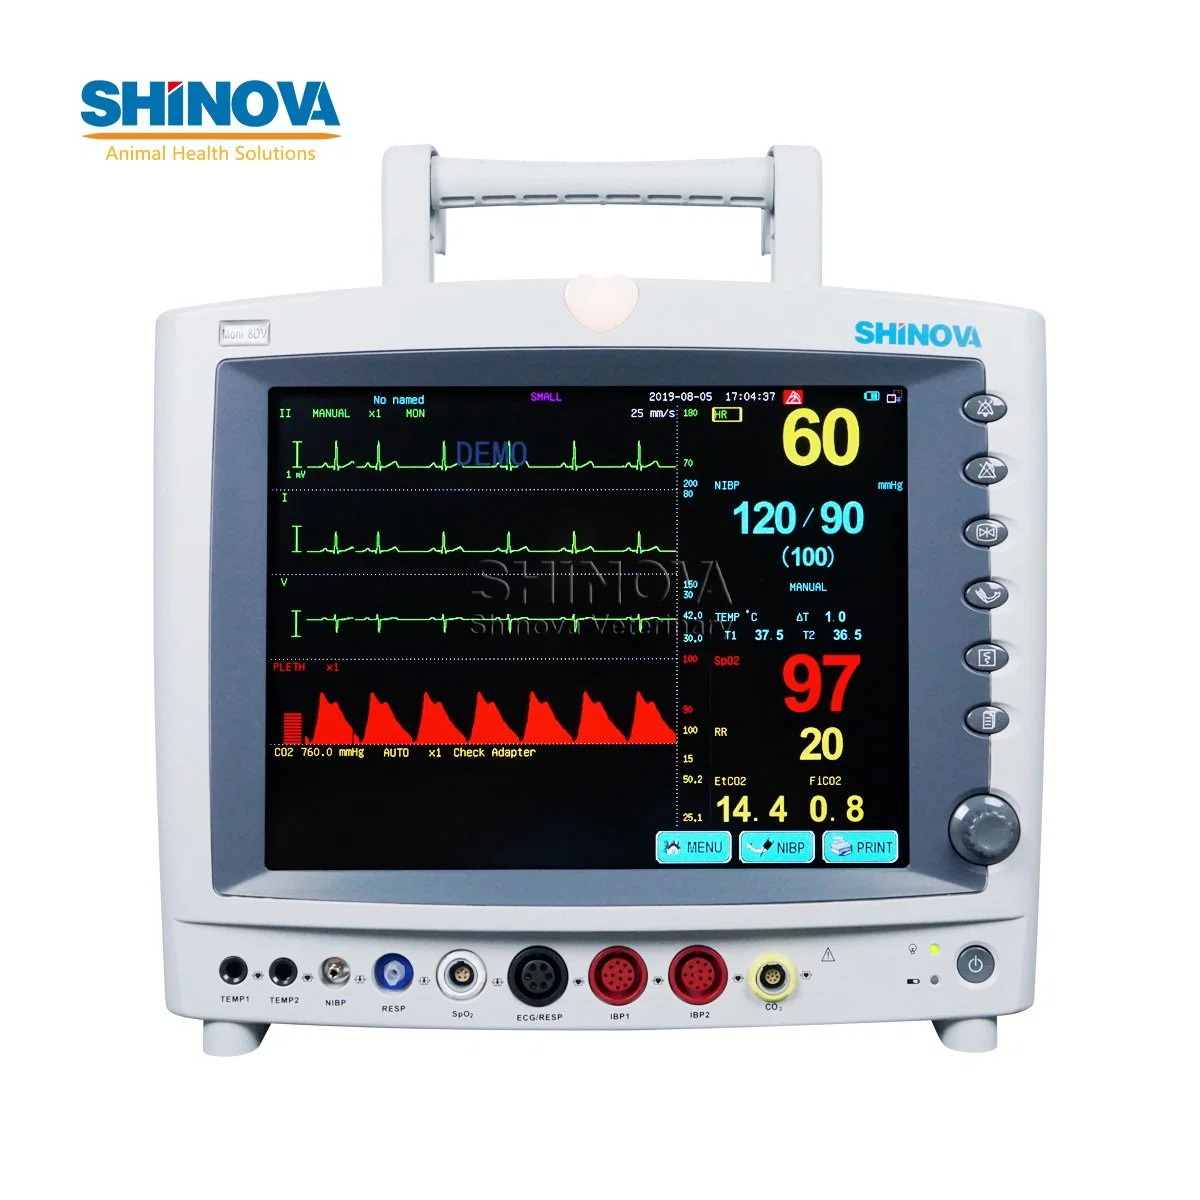 12.1 Inch Portable Multi-Parameter Patient Monitor Vital Signs Monitor Veterinary Monitor for Veterinary Hospital Use